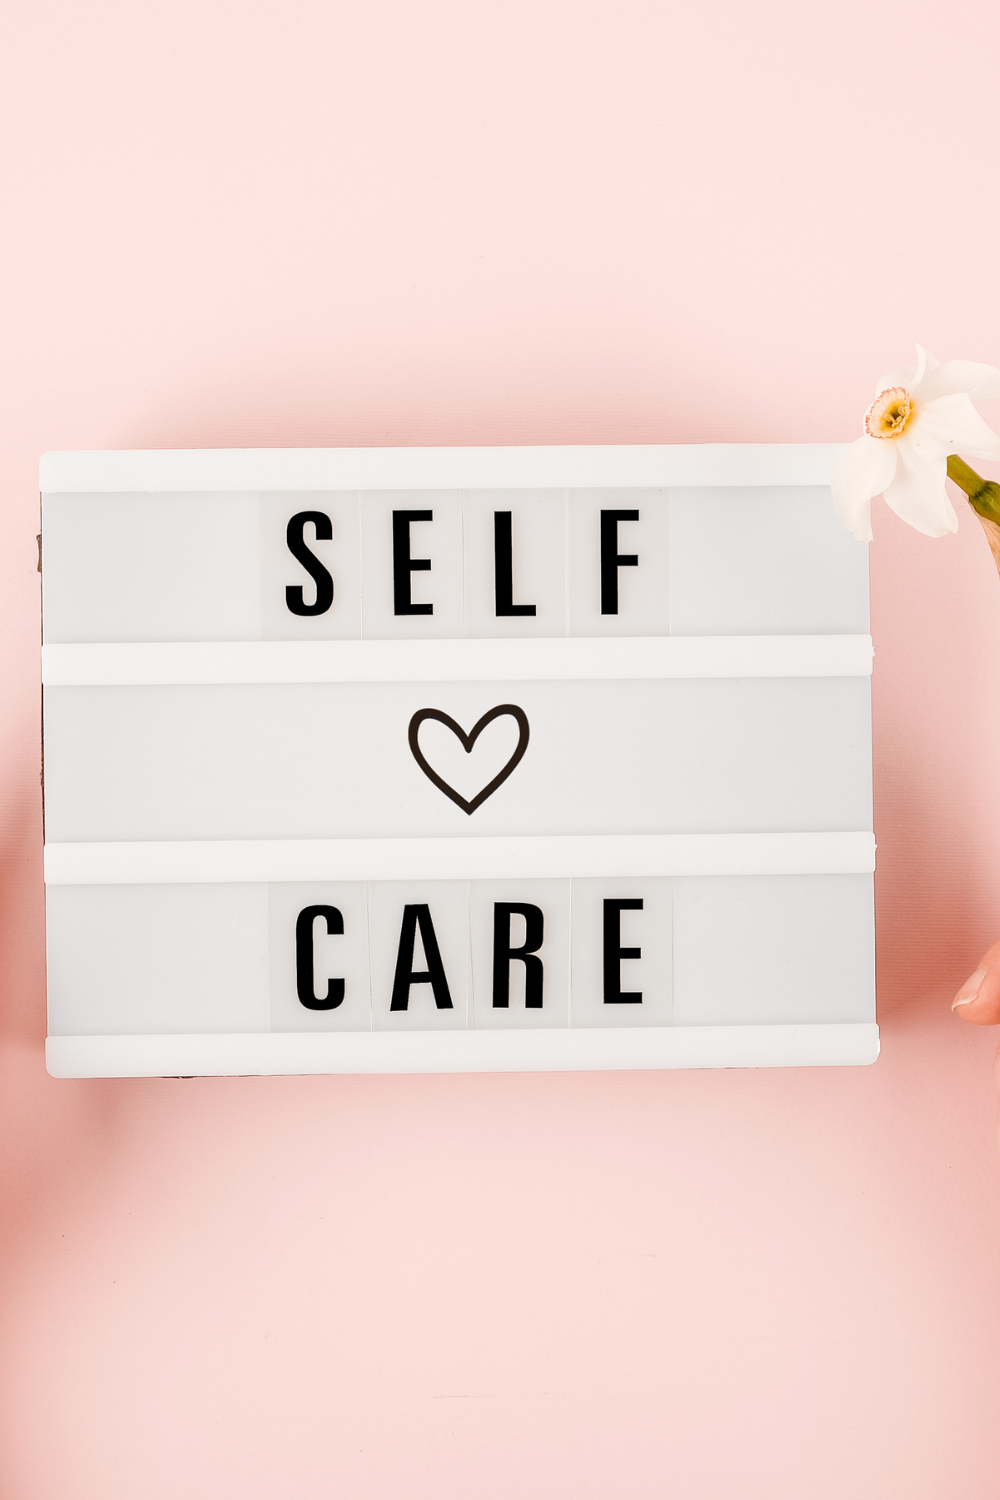 Unique Self-Care Ideas Worth Trying In The New Normal